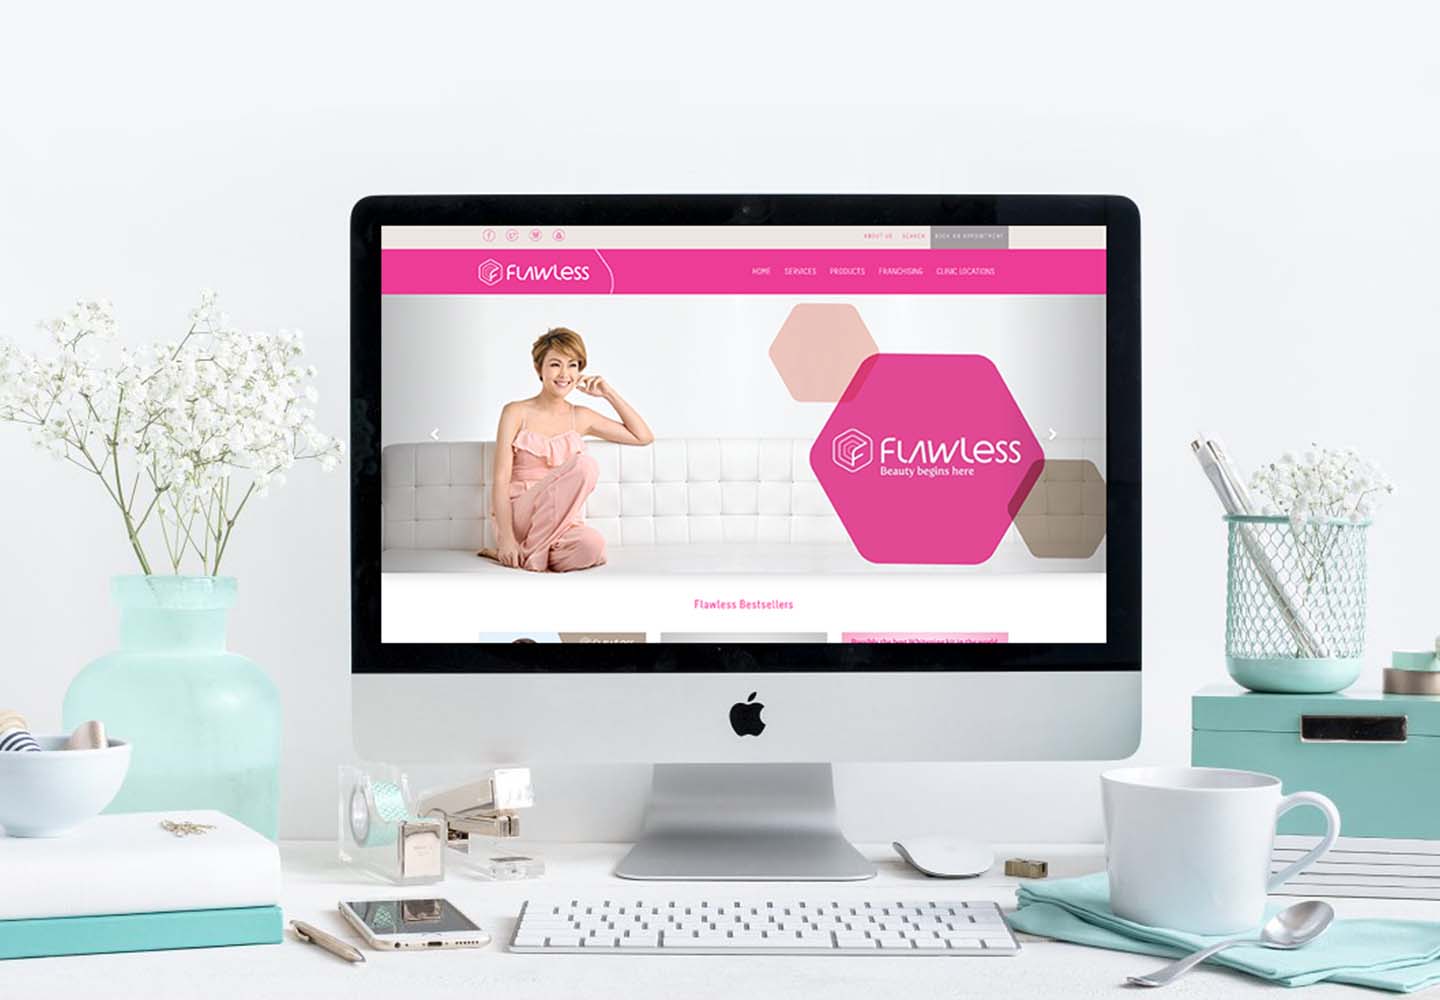 Brand Consultancy in Lifestyle Industry. Website design for Flawless.